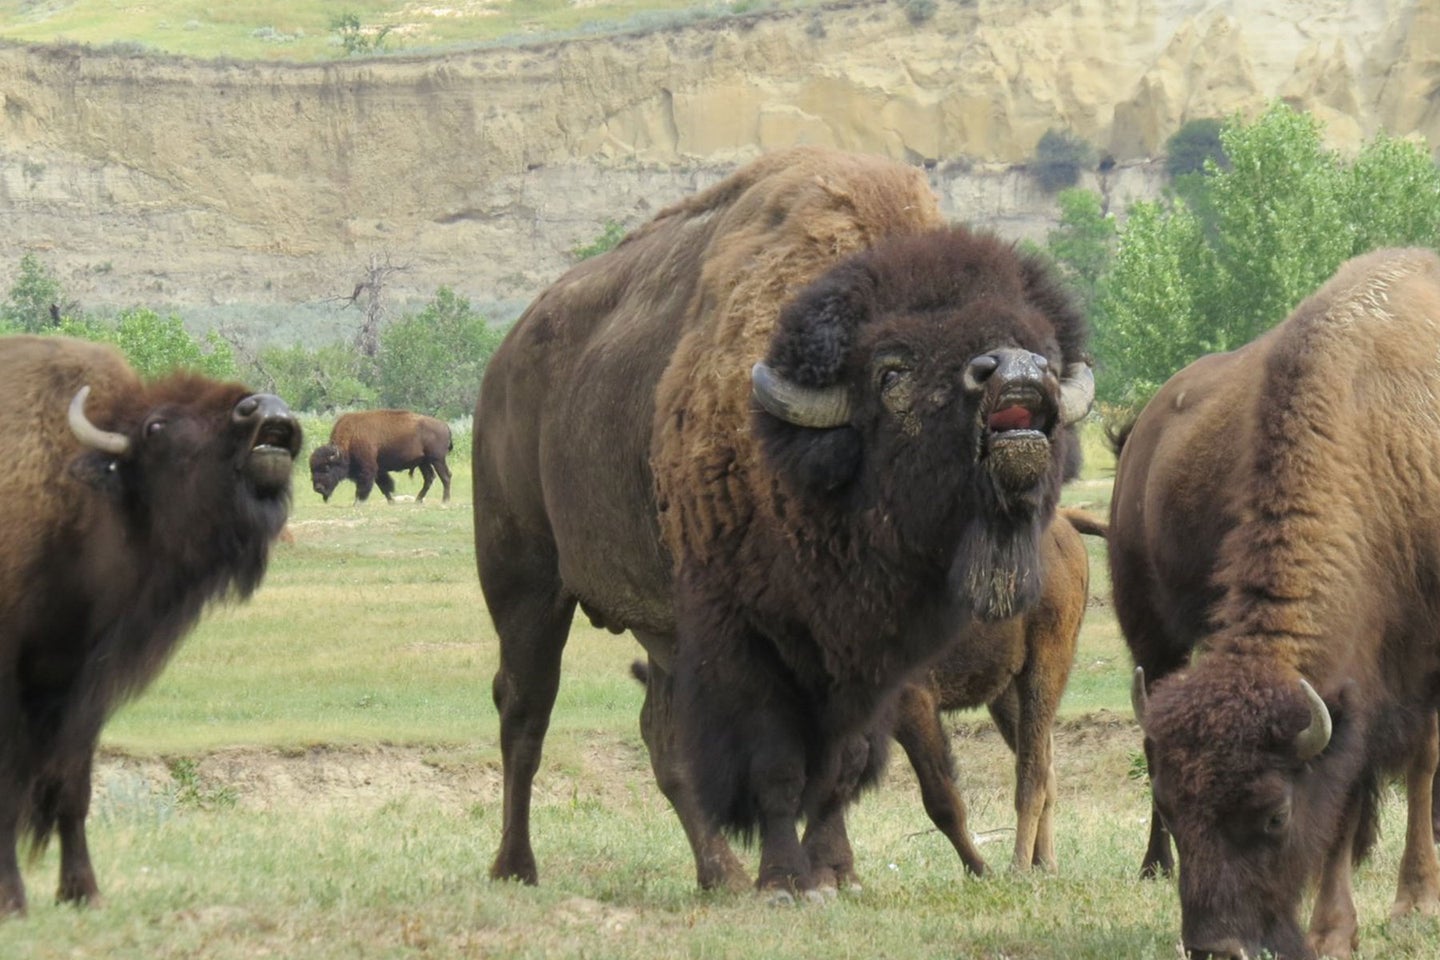 Bison were reintroduced to Theodore Roosevelt National Park in 1956.